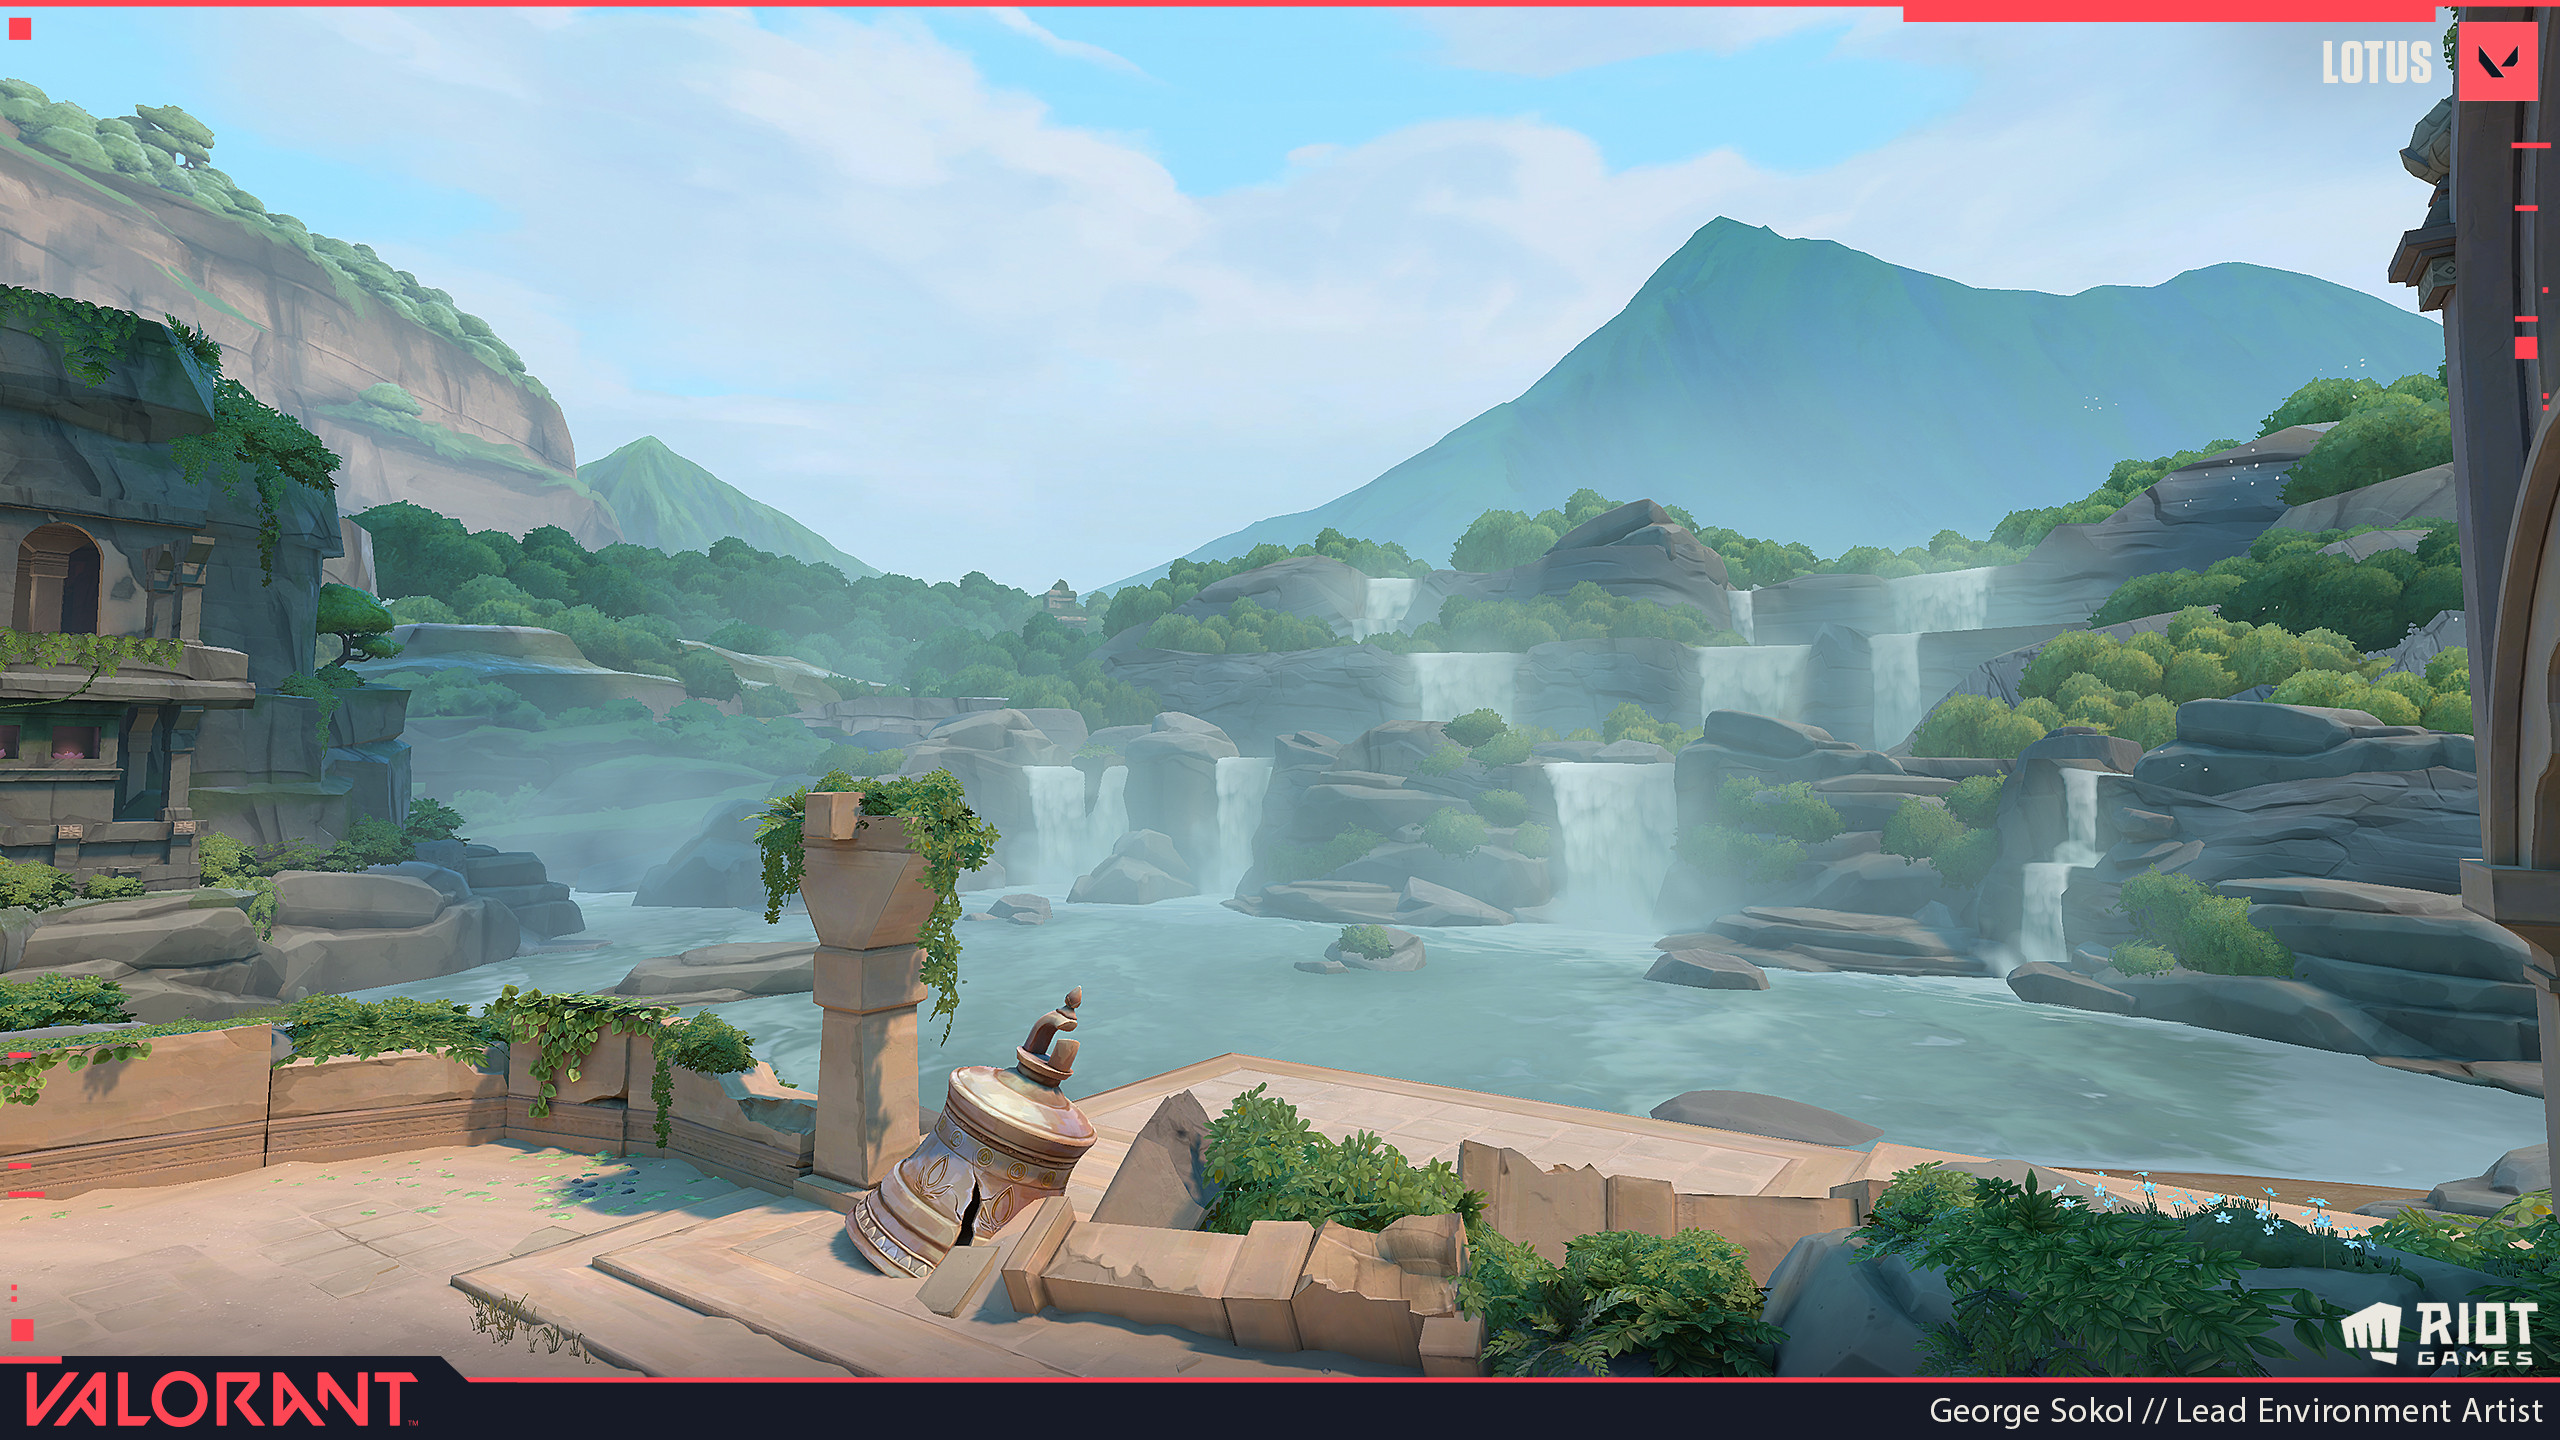 Defender Vista!  Sabrina did the initial composition via blockout, then we tag teamed the Art Production pass and Bruno leveled everything up with the waterfall VFX!